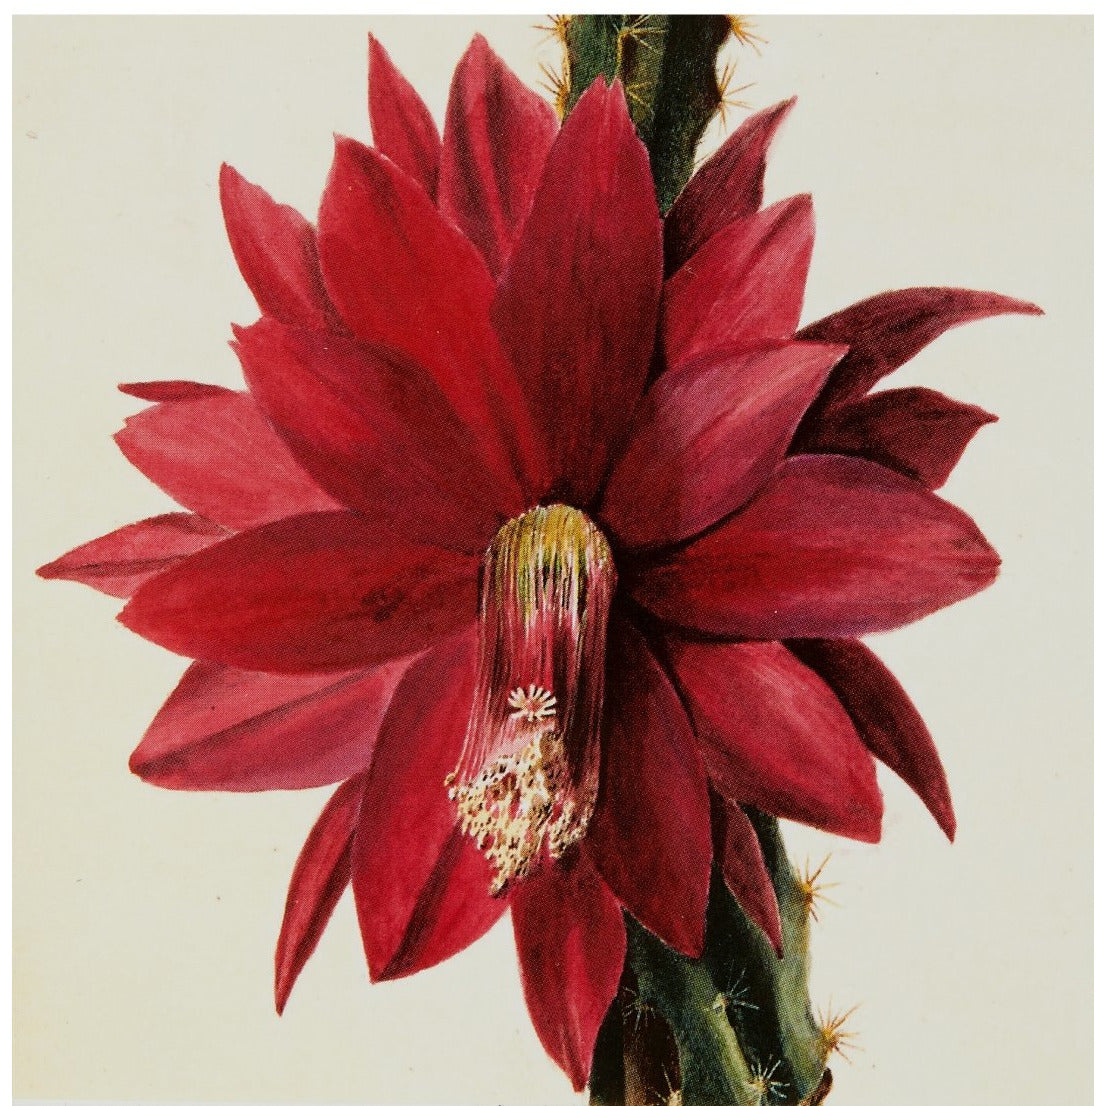 Notecard - Heliocereus speciosus by Isabella Selwin. From the Broughton collection of the Fitzwilliam Museum, brought to you by CuratingCambridge.co.uk